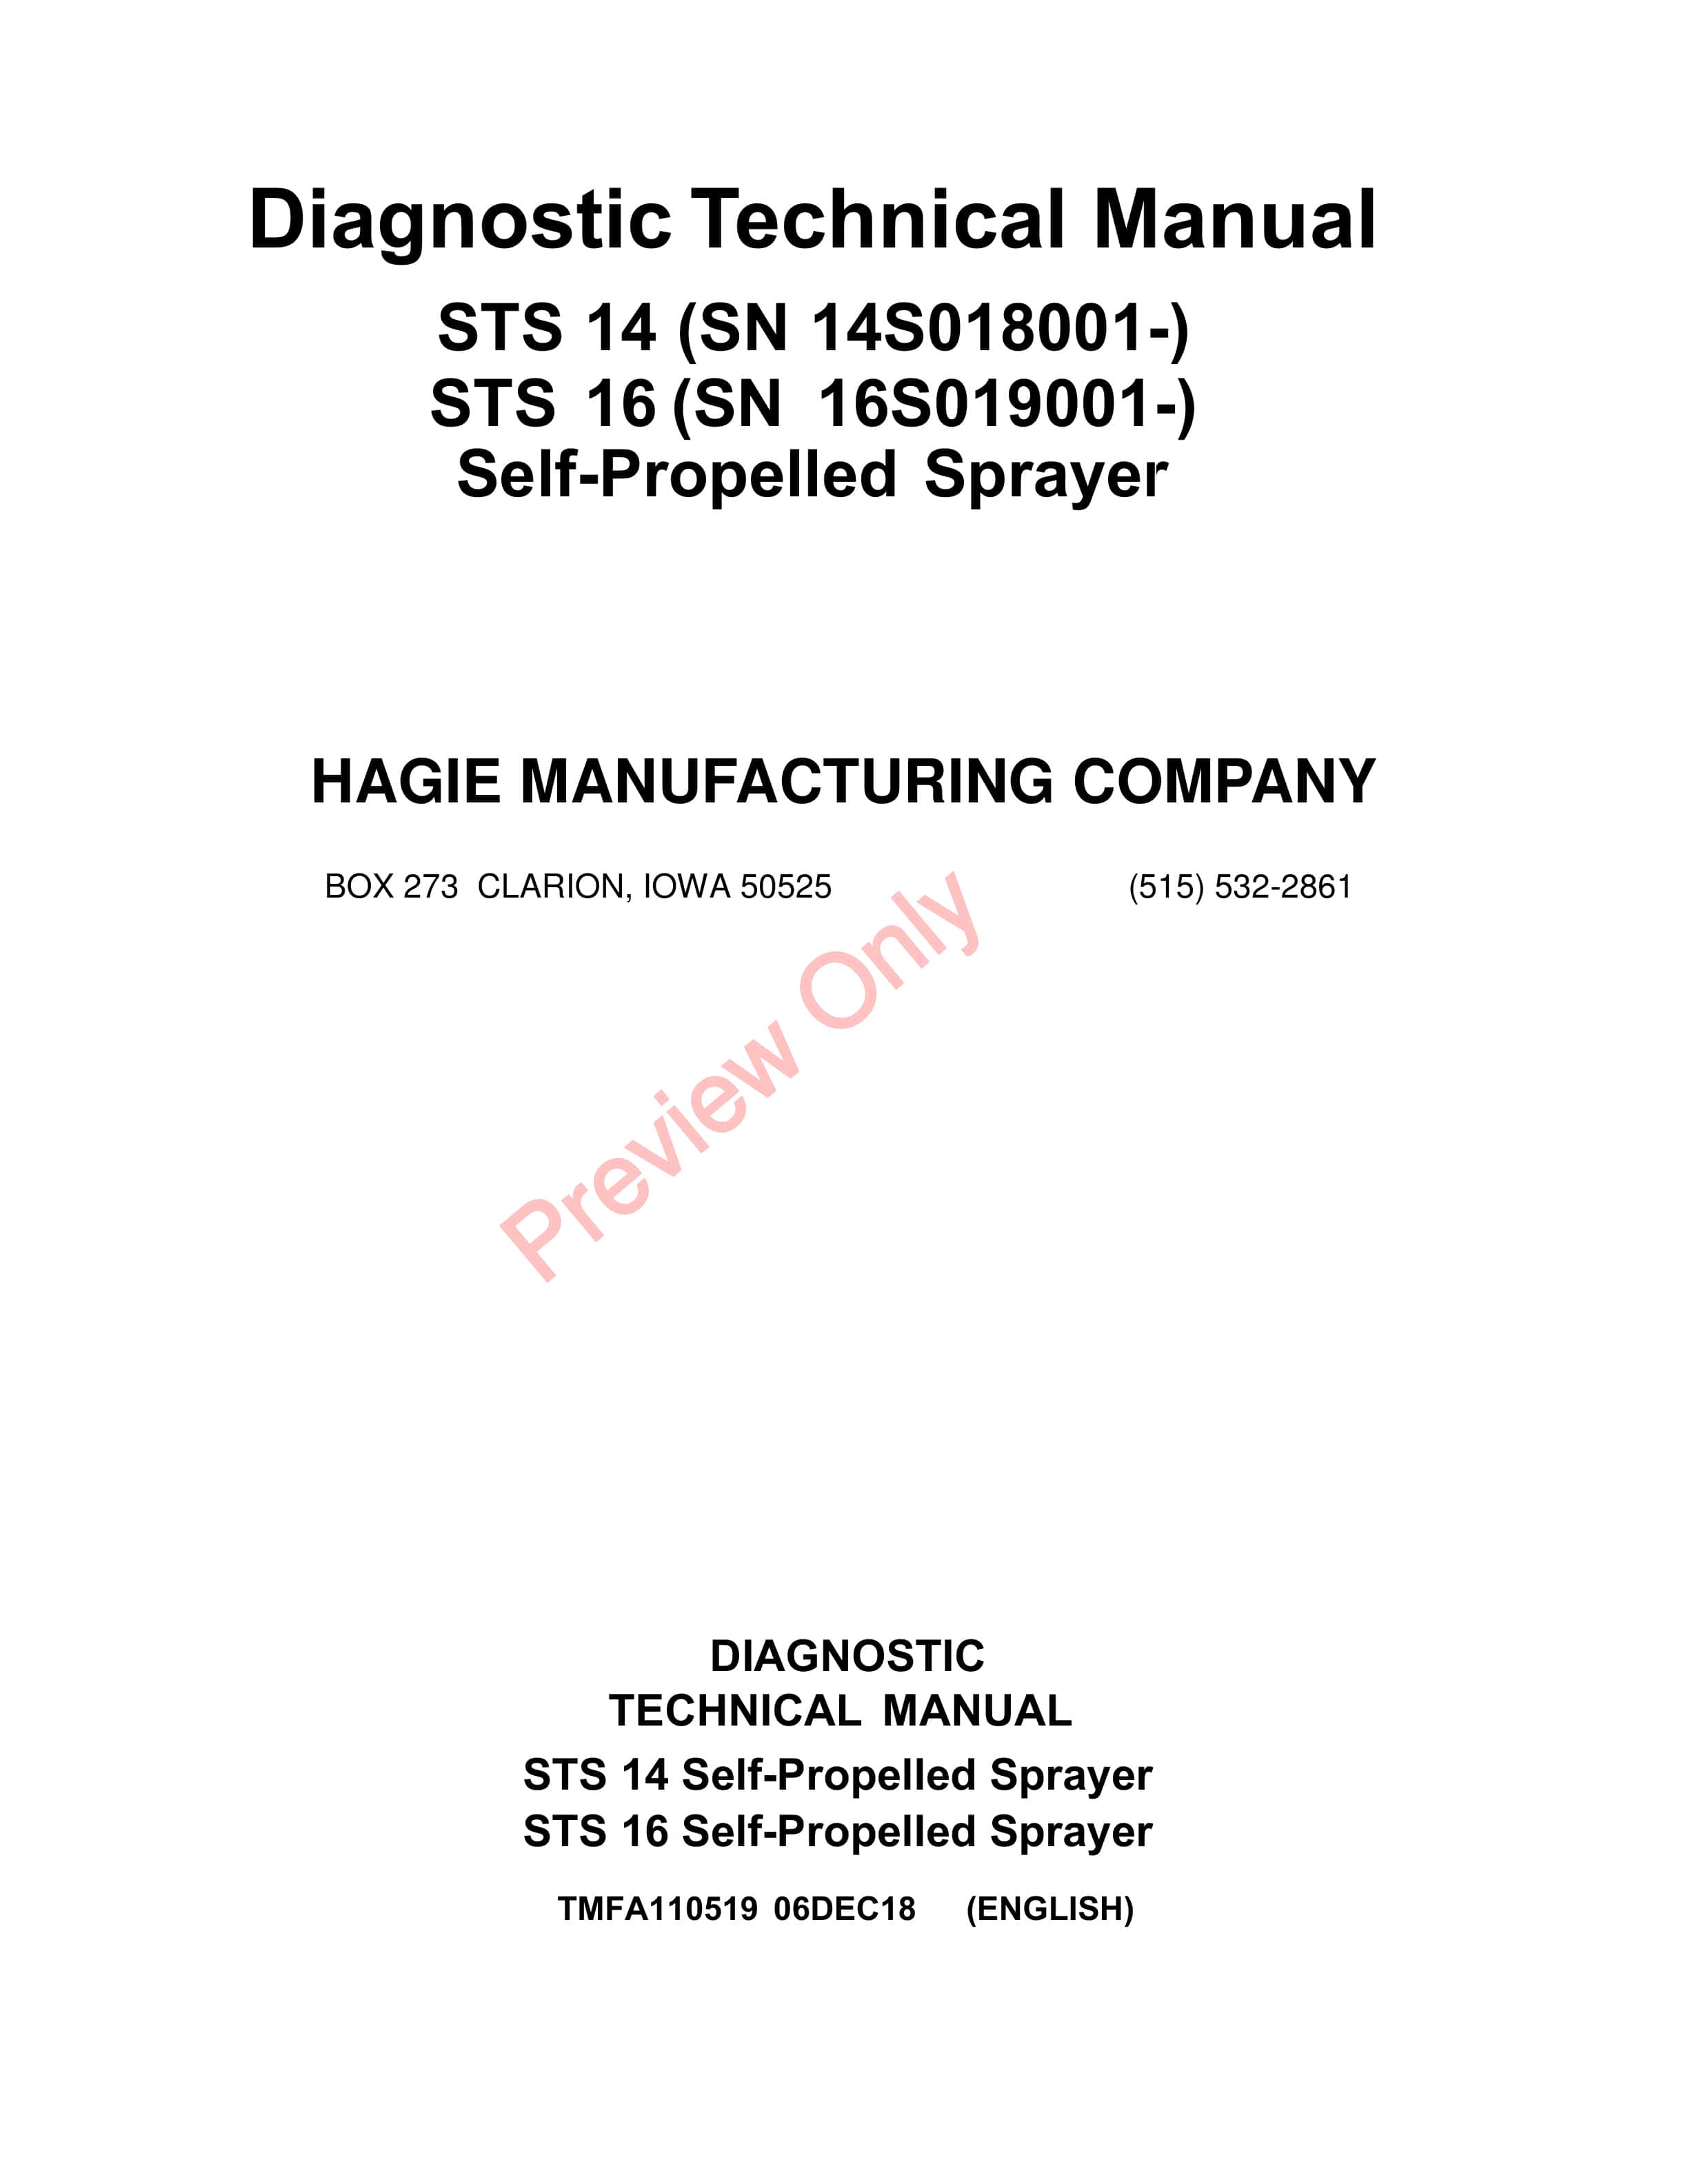 John Deere STS14 and STS16 Self Propelled Sprayers Diagnostic Technical Manual TMFA110519 06DEC18 1